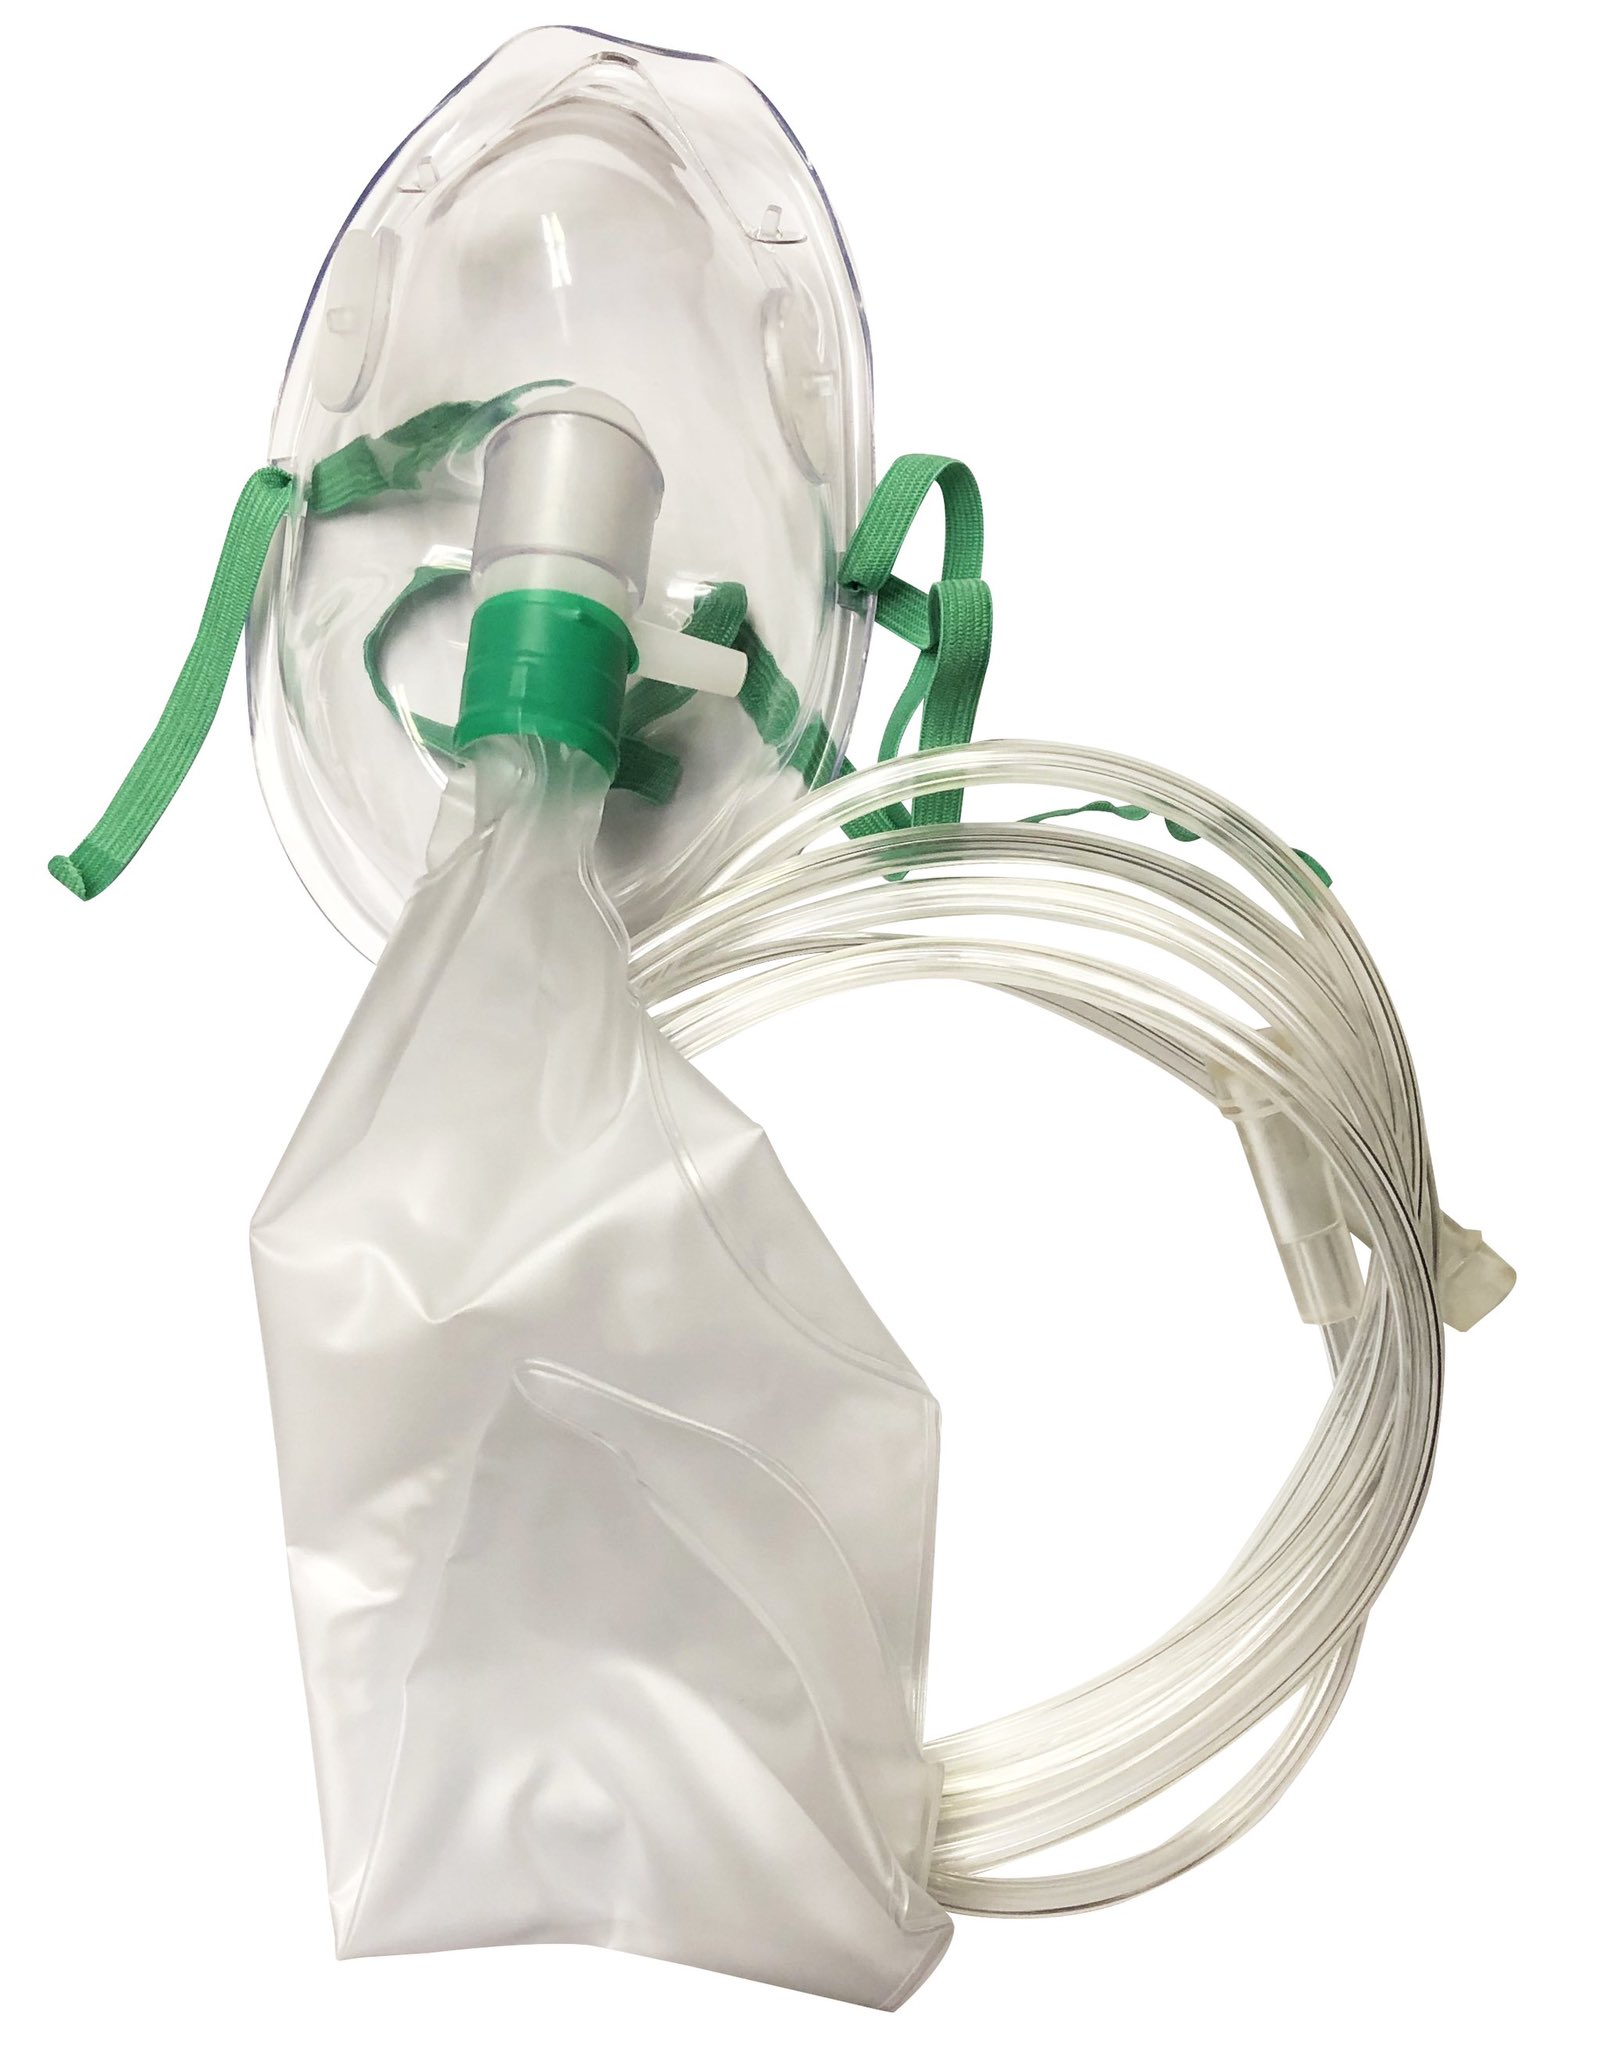 💉Josh Rubin, MD 🩺 on Twitter: "Non-Rebreather 60-95% FiO2, depending on the flow rate and tight seal on the face A simple face mask an oxygen reservoir bag. Flow must